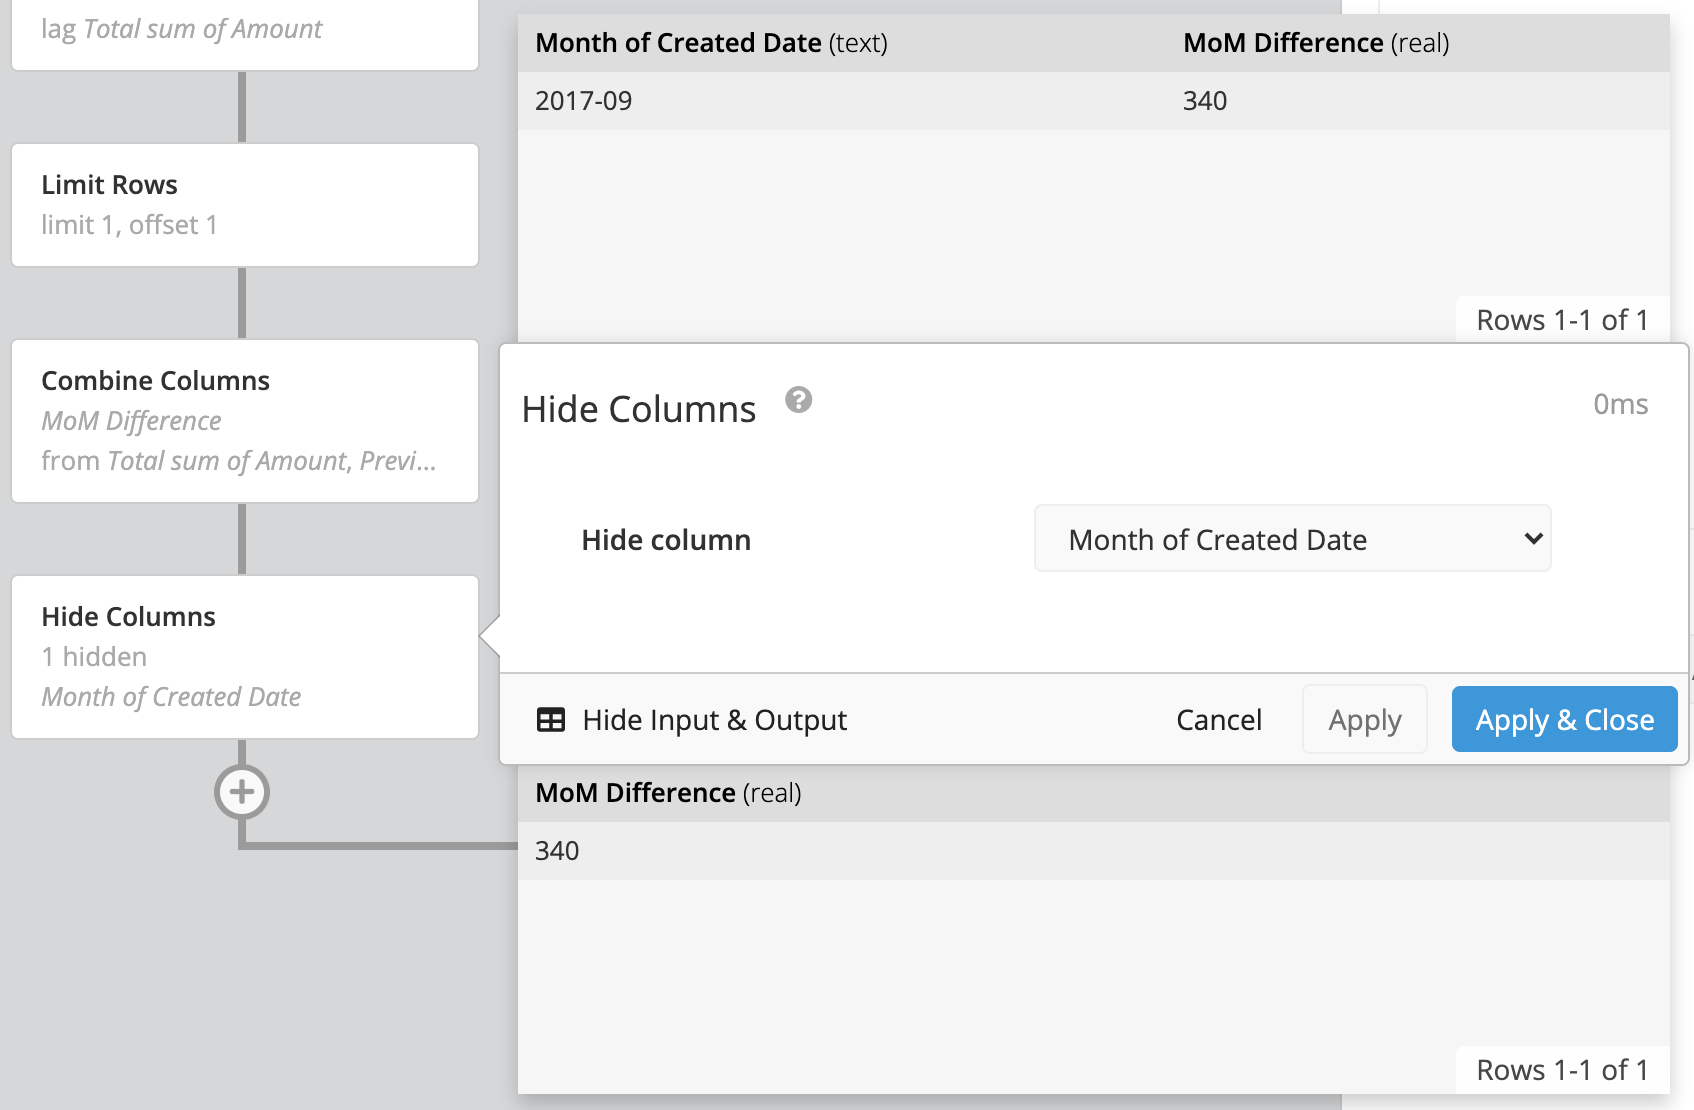 Add a Hide Columns step in the Pipeline